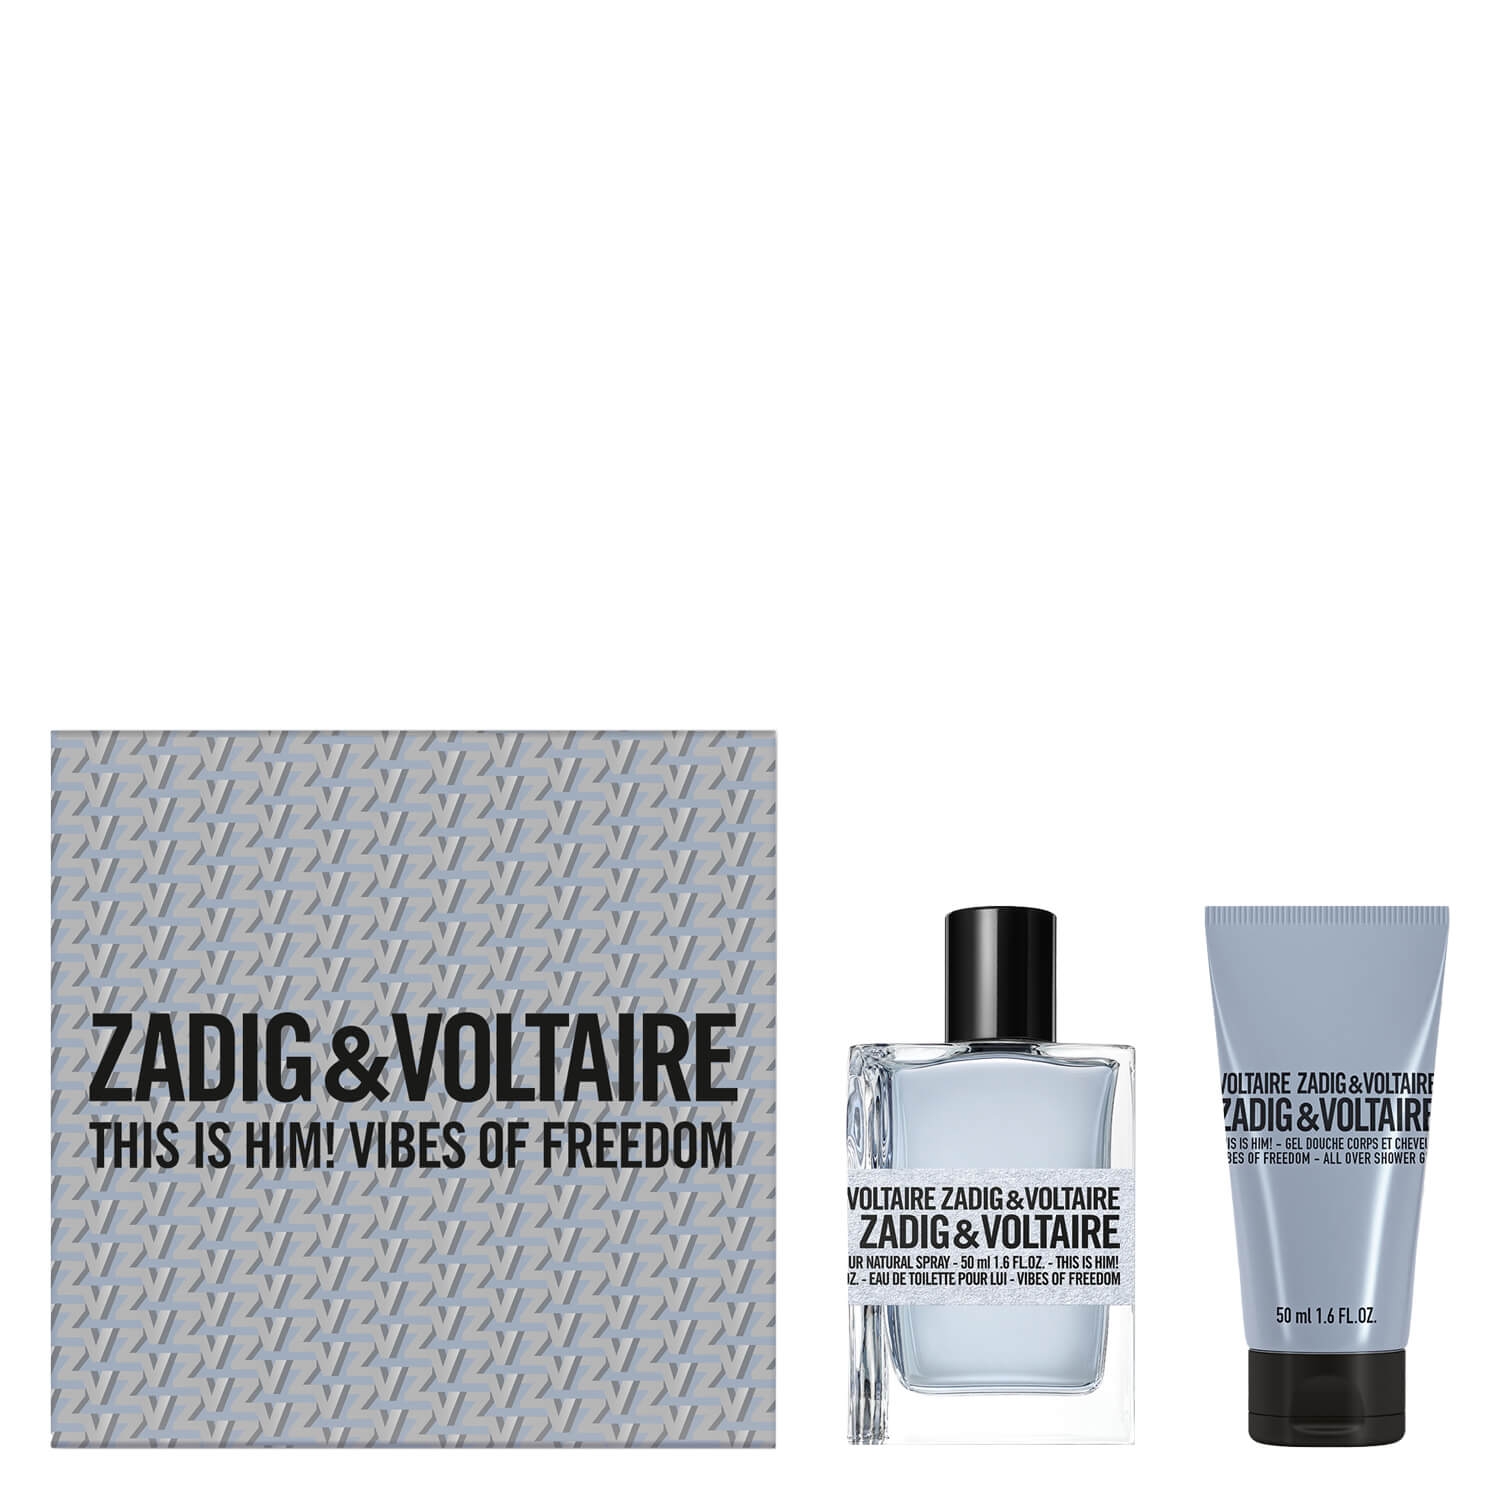 Product image from This is Him! - Vibes of Freedom Eau de Toilette Set